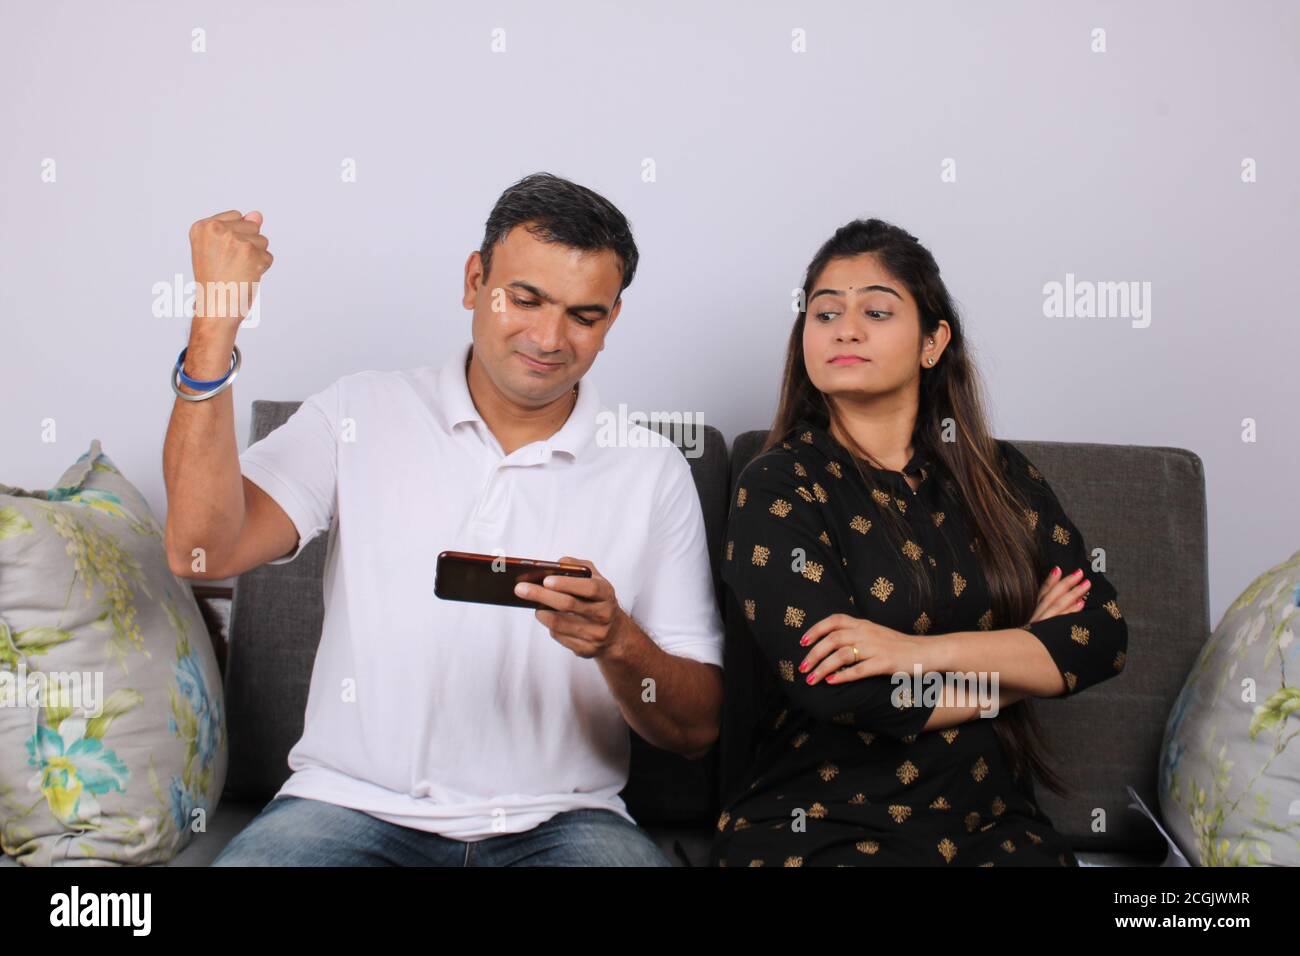 Young girl sitting on sofa is feeling bored with her husband because his addicted cellphone behavior ignoring her in relationship domestic problem. Stock Photo